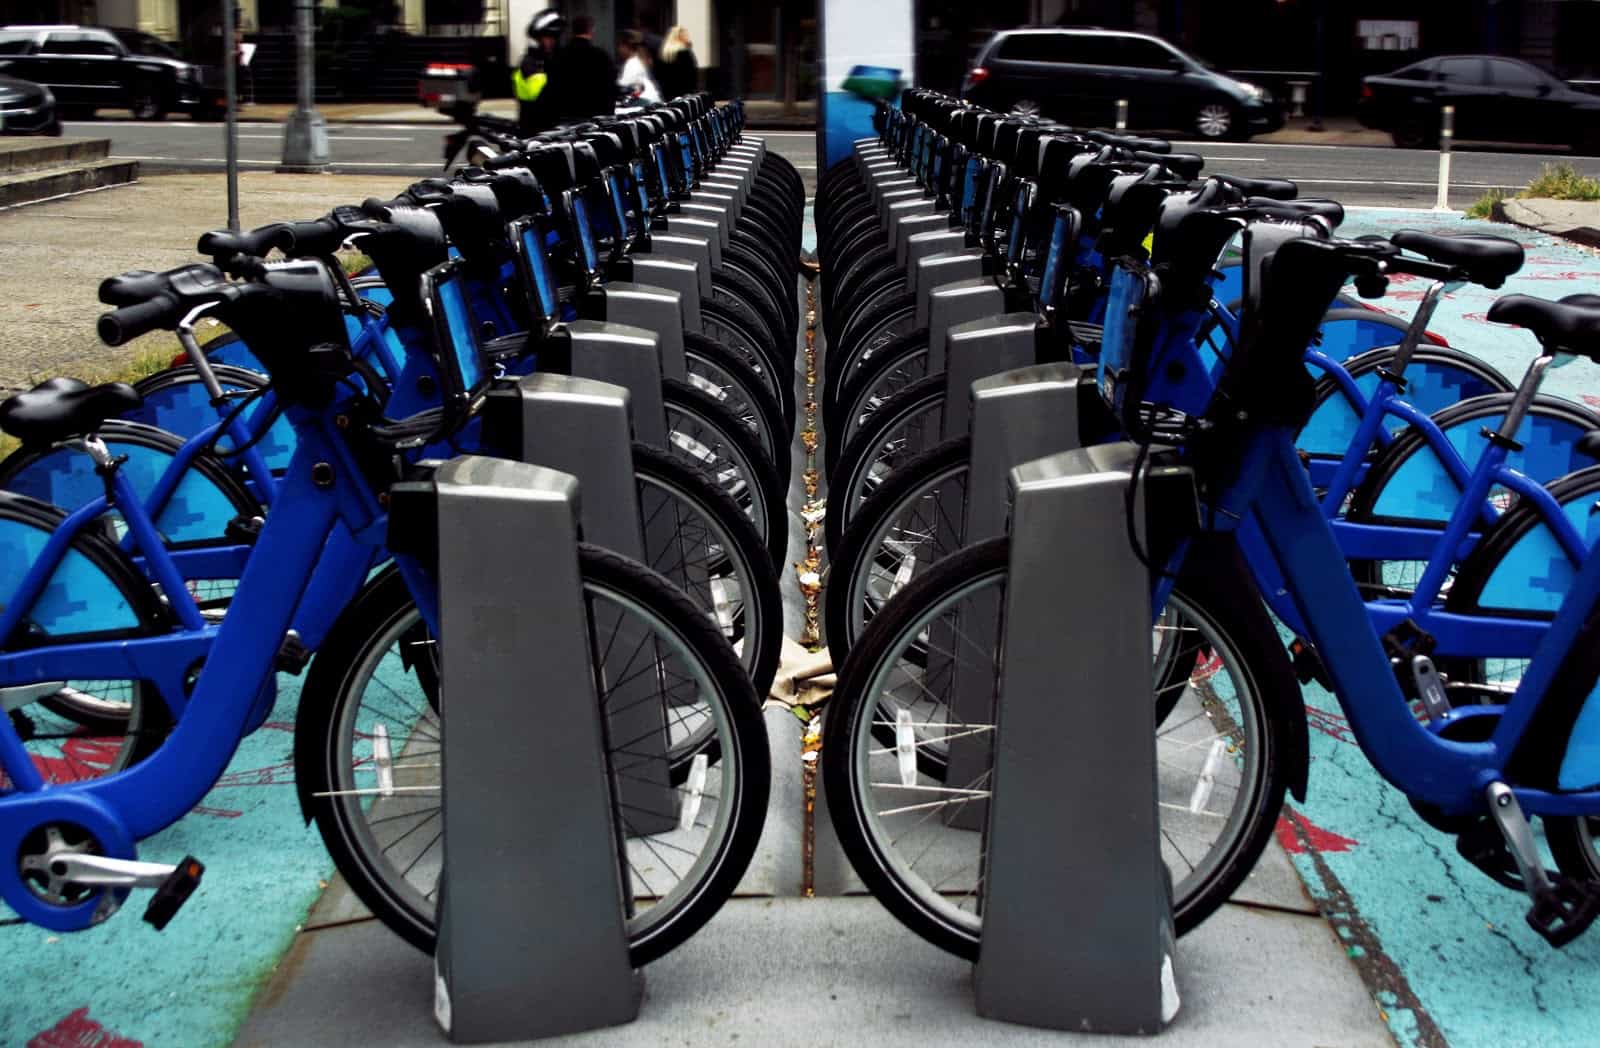 Blue bicycles lined up in city